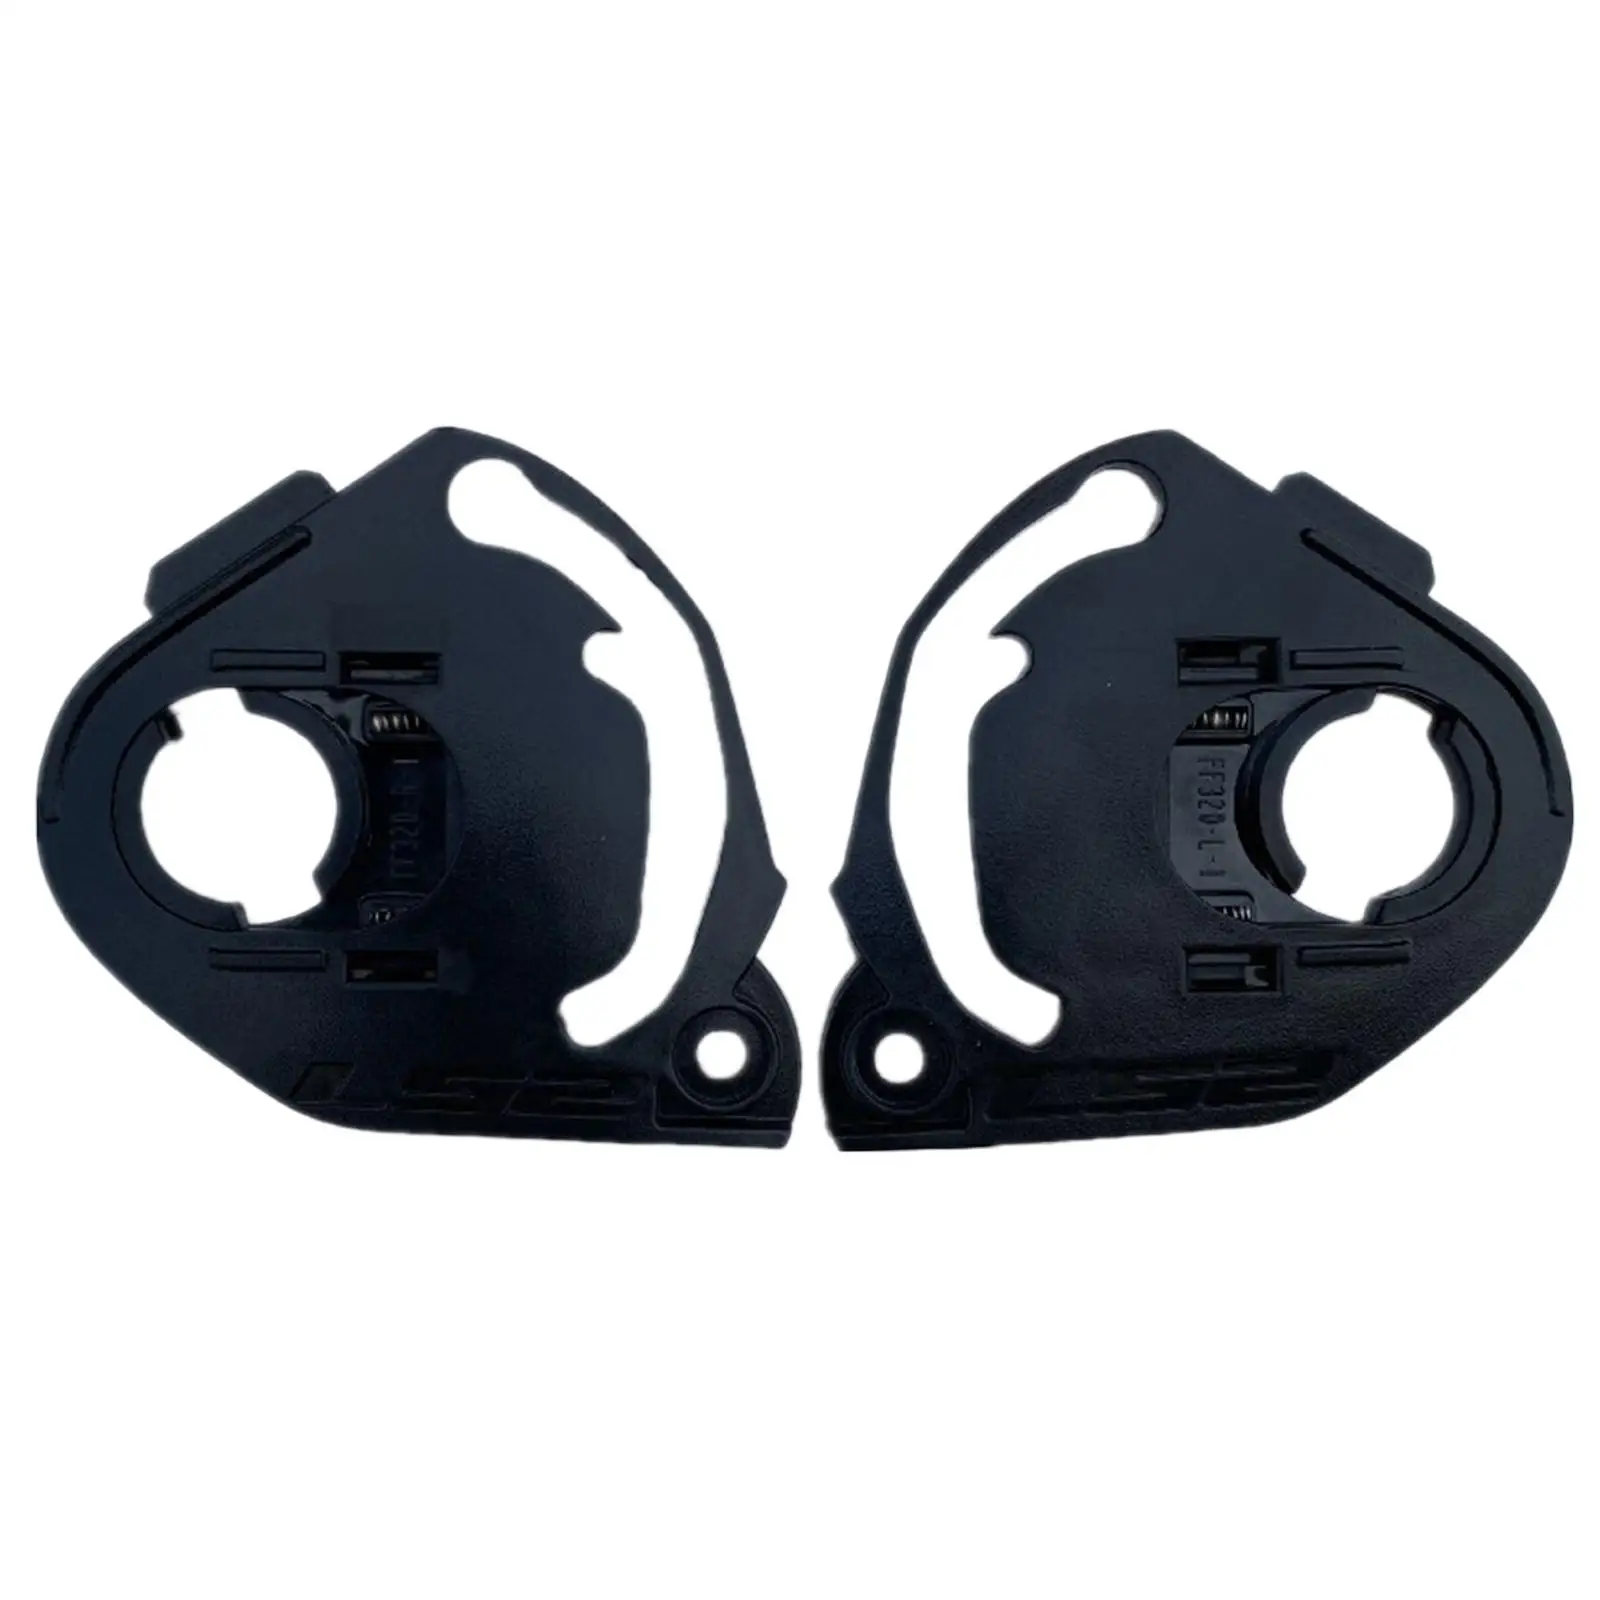 2 Pieces Motorcycles , Visor Mounts Fit for Ff320 Ff328 Ff353 800 320